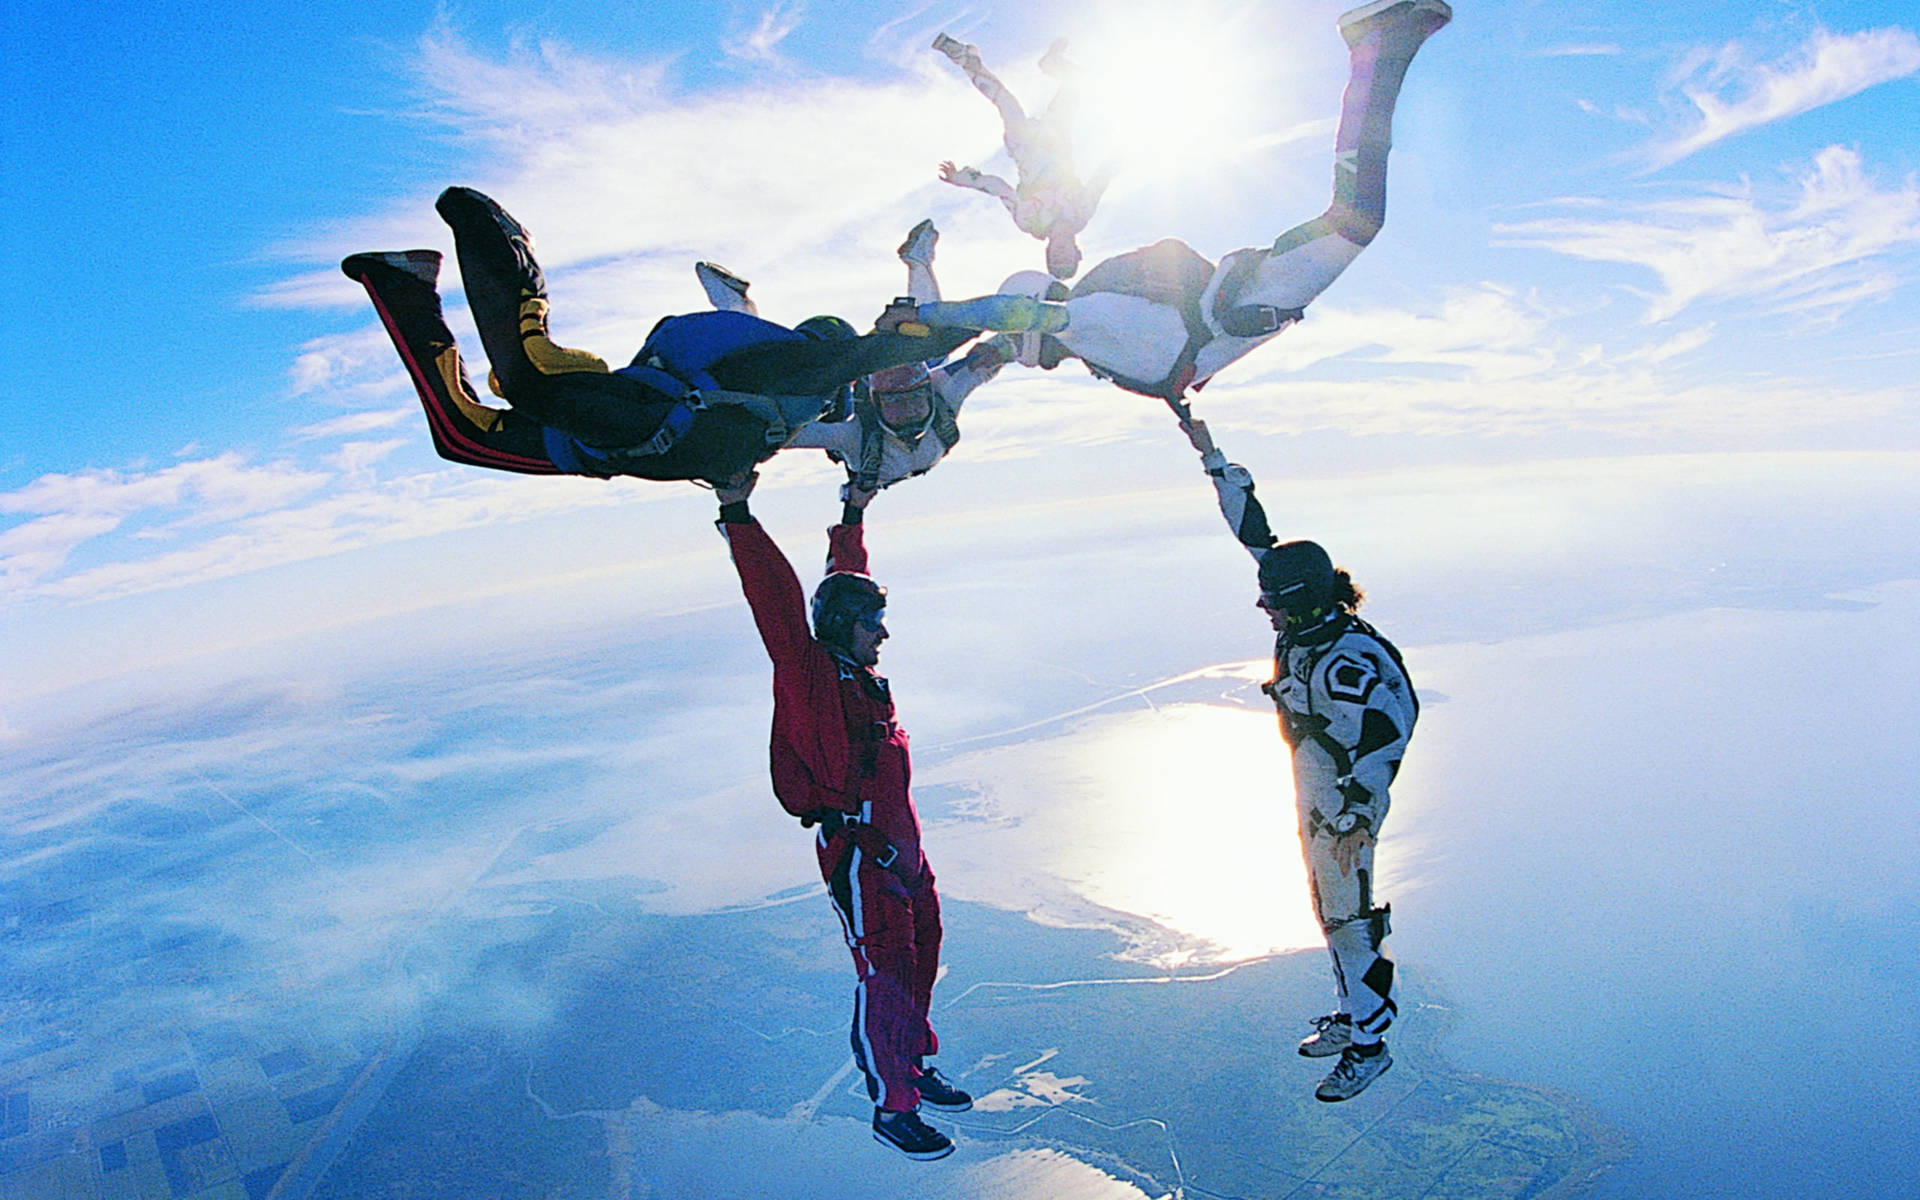 Extreme Sports Formation Skydiving Picture